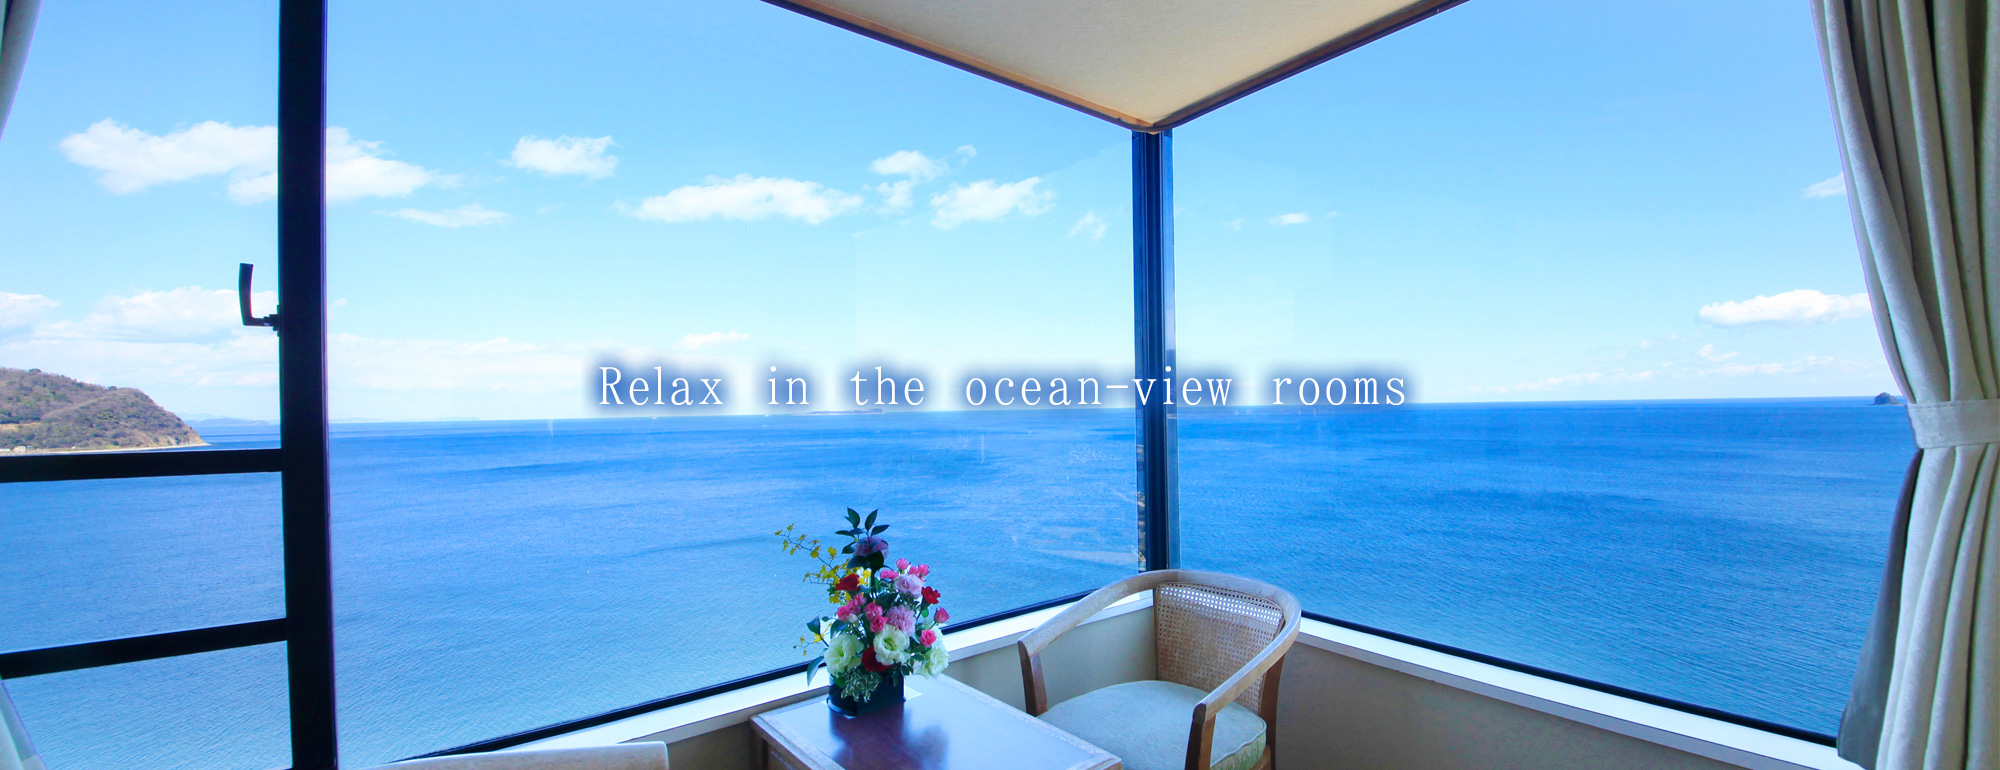 Relax in the ocean-view rooms